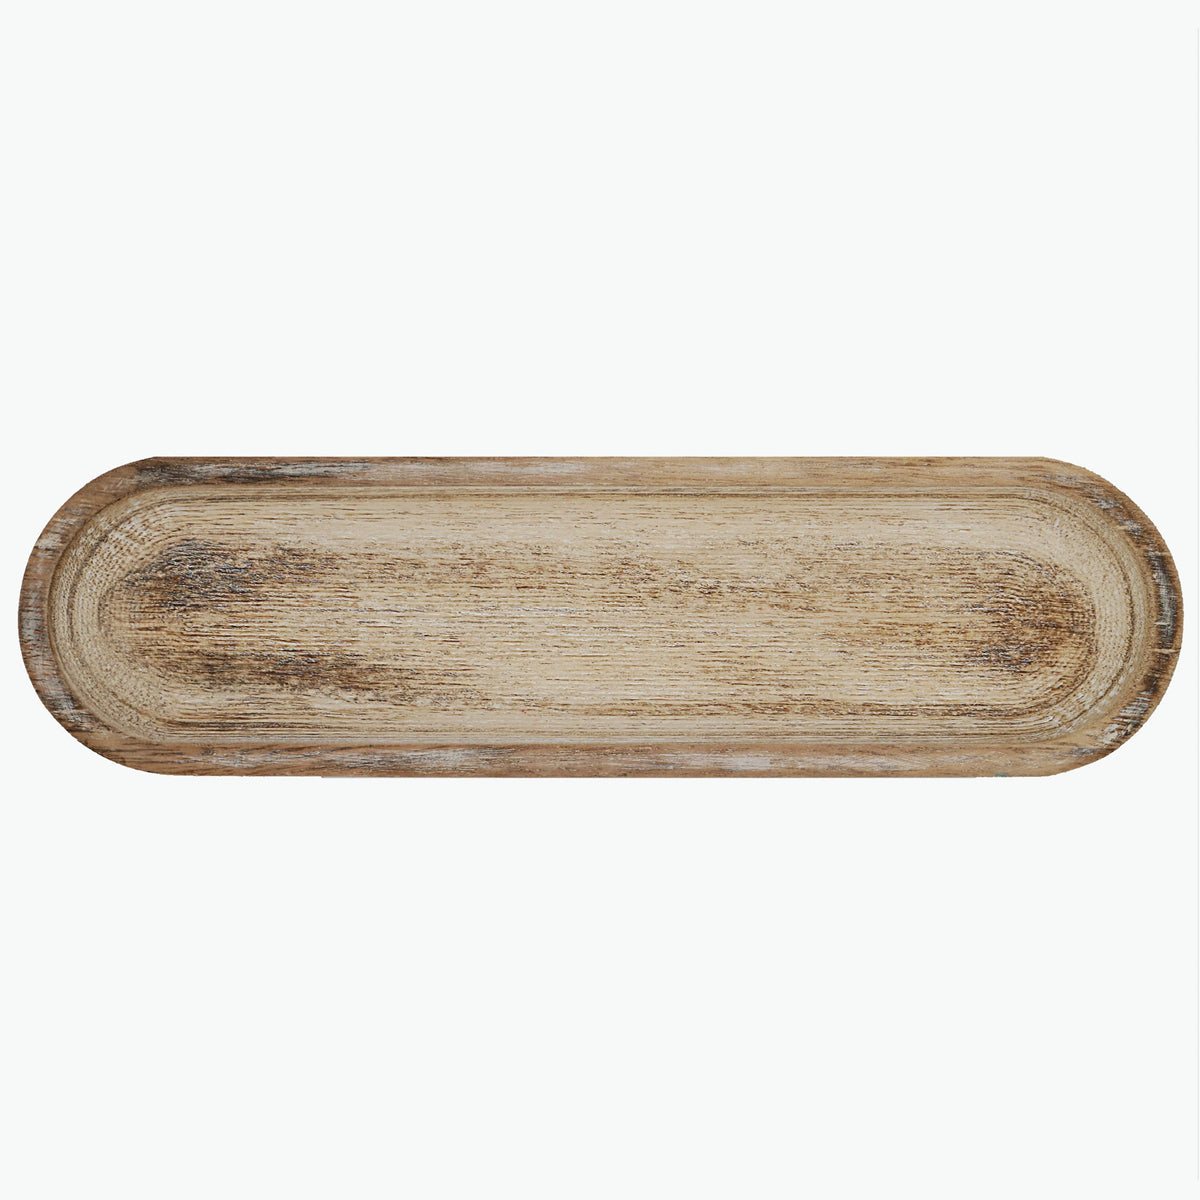 Large Rustic Wood Tray